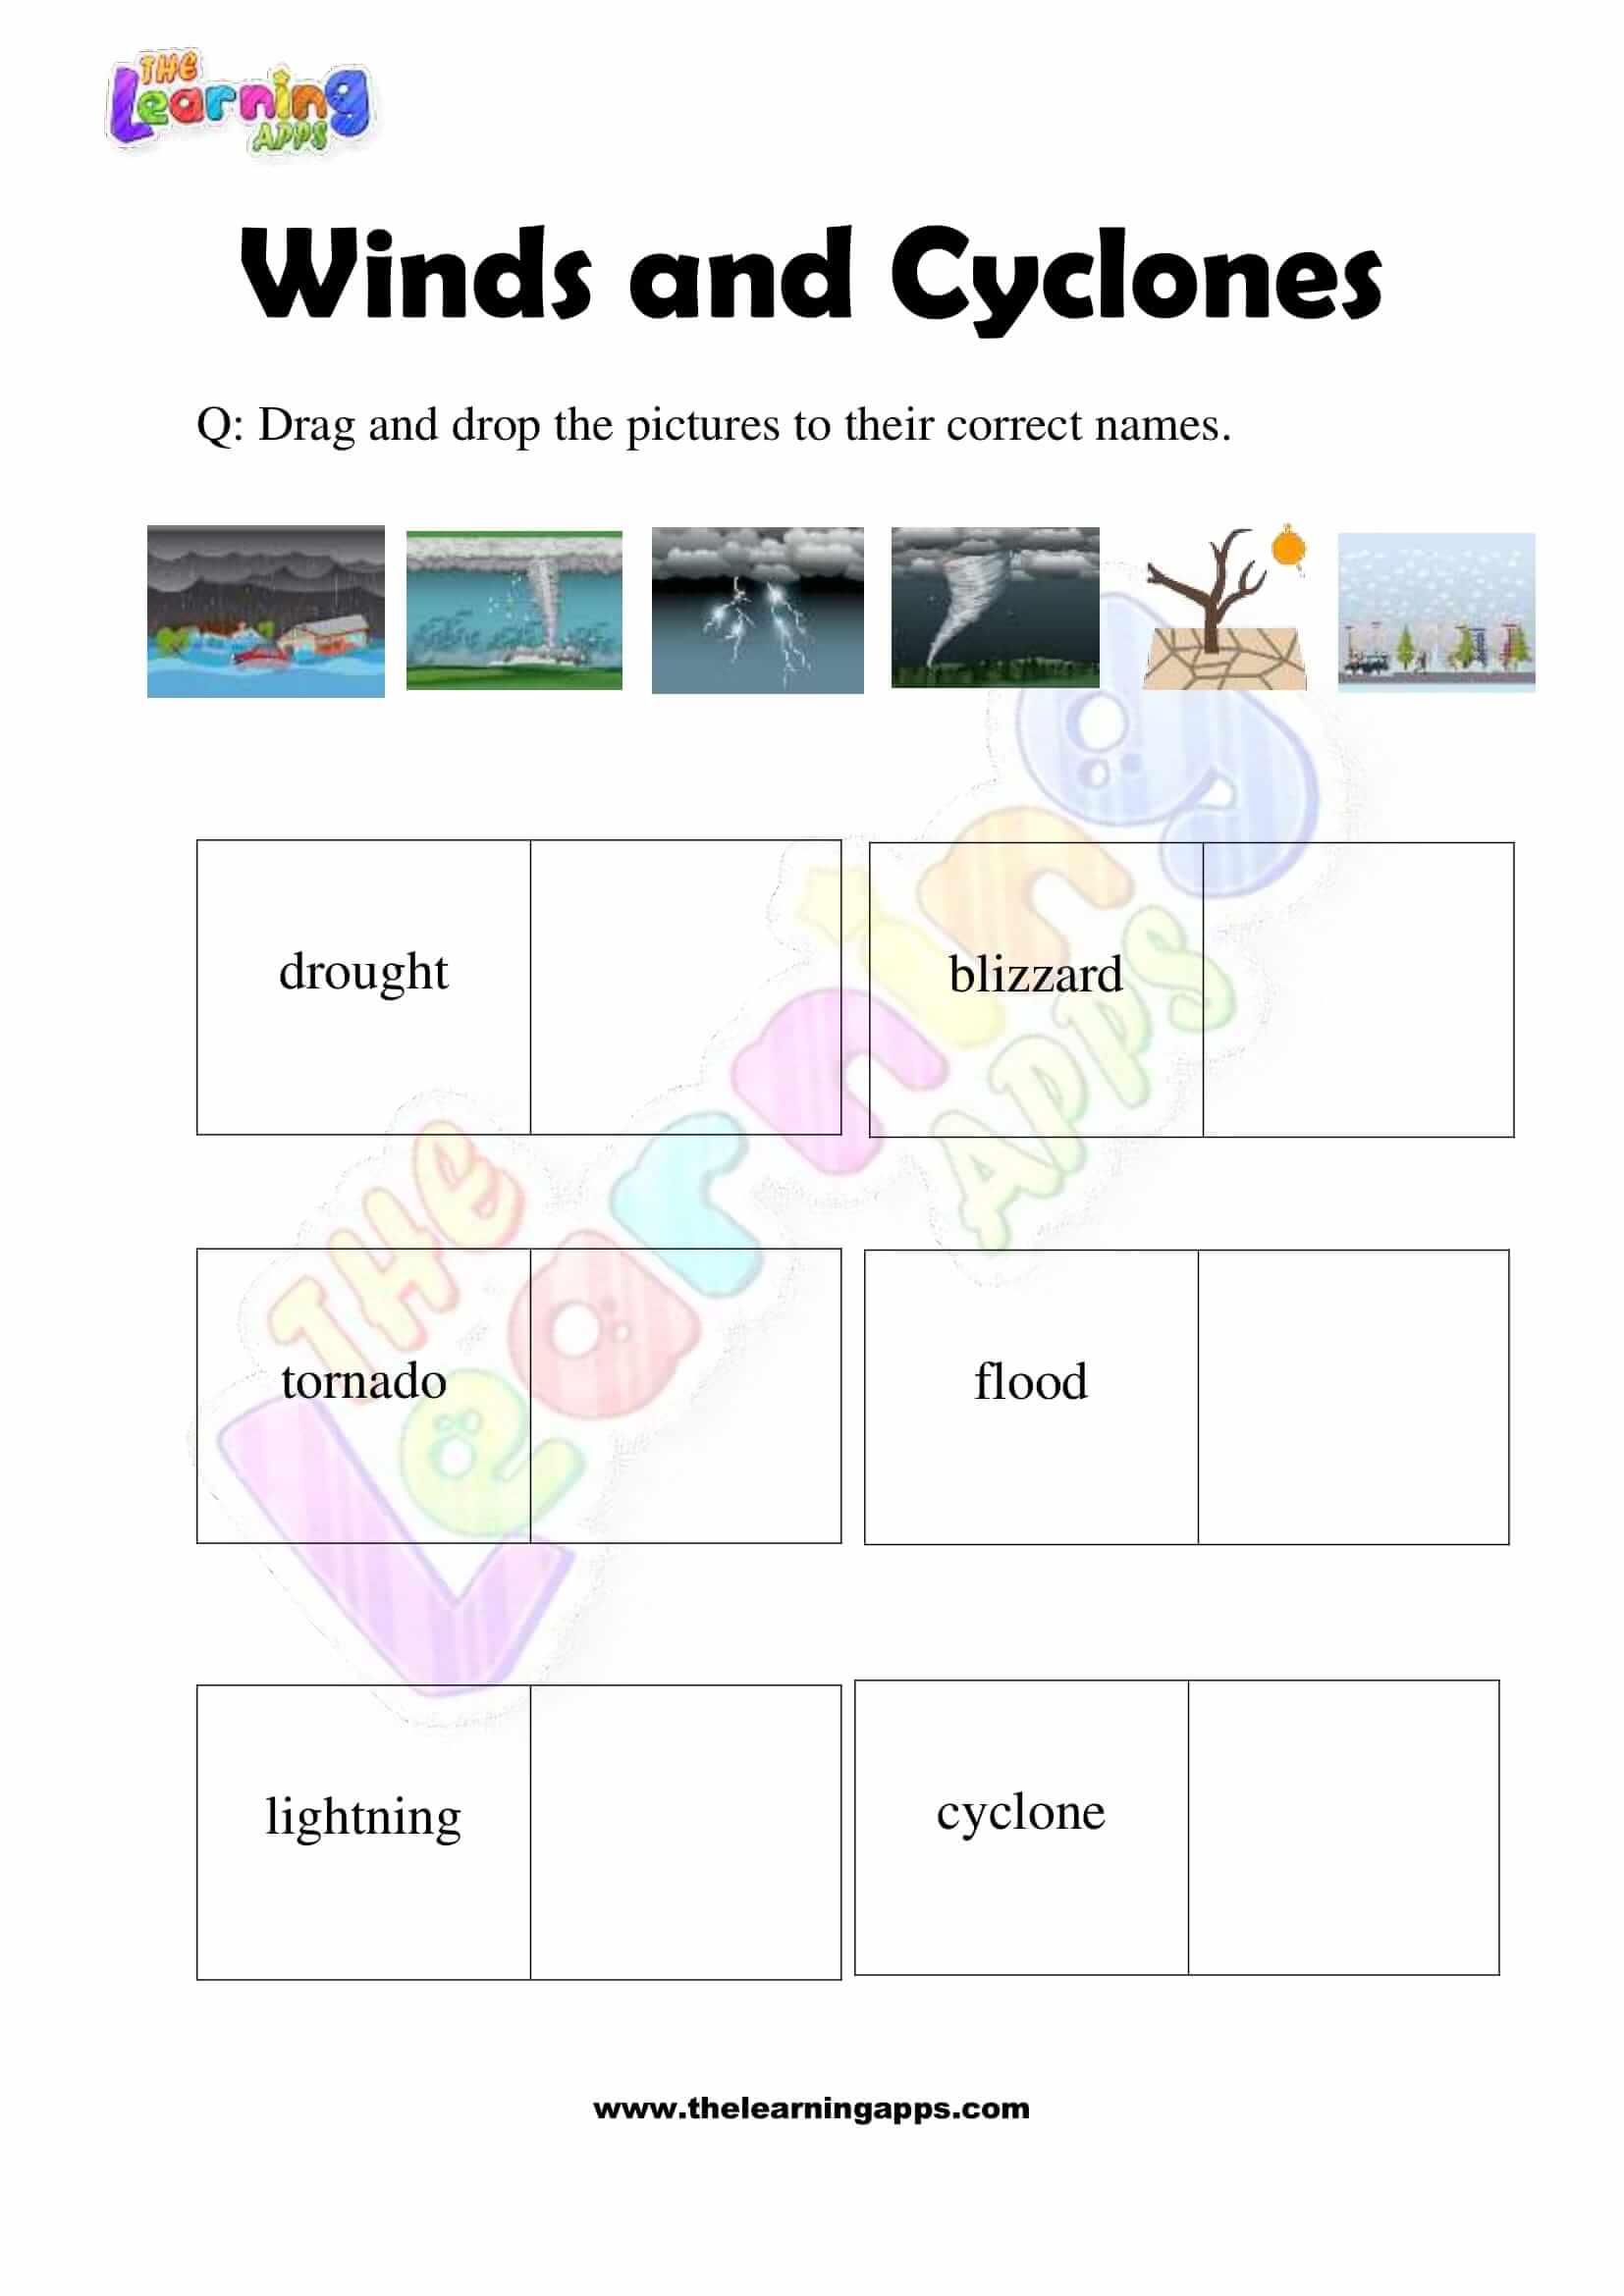 Winds and Cyclones - Grade 2 - Activity 8